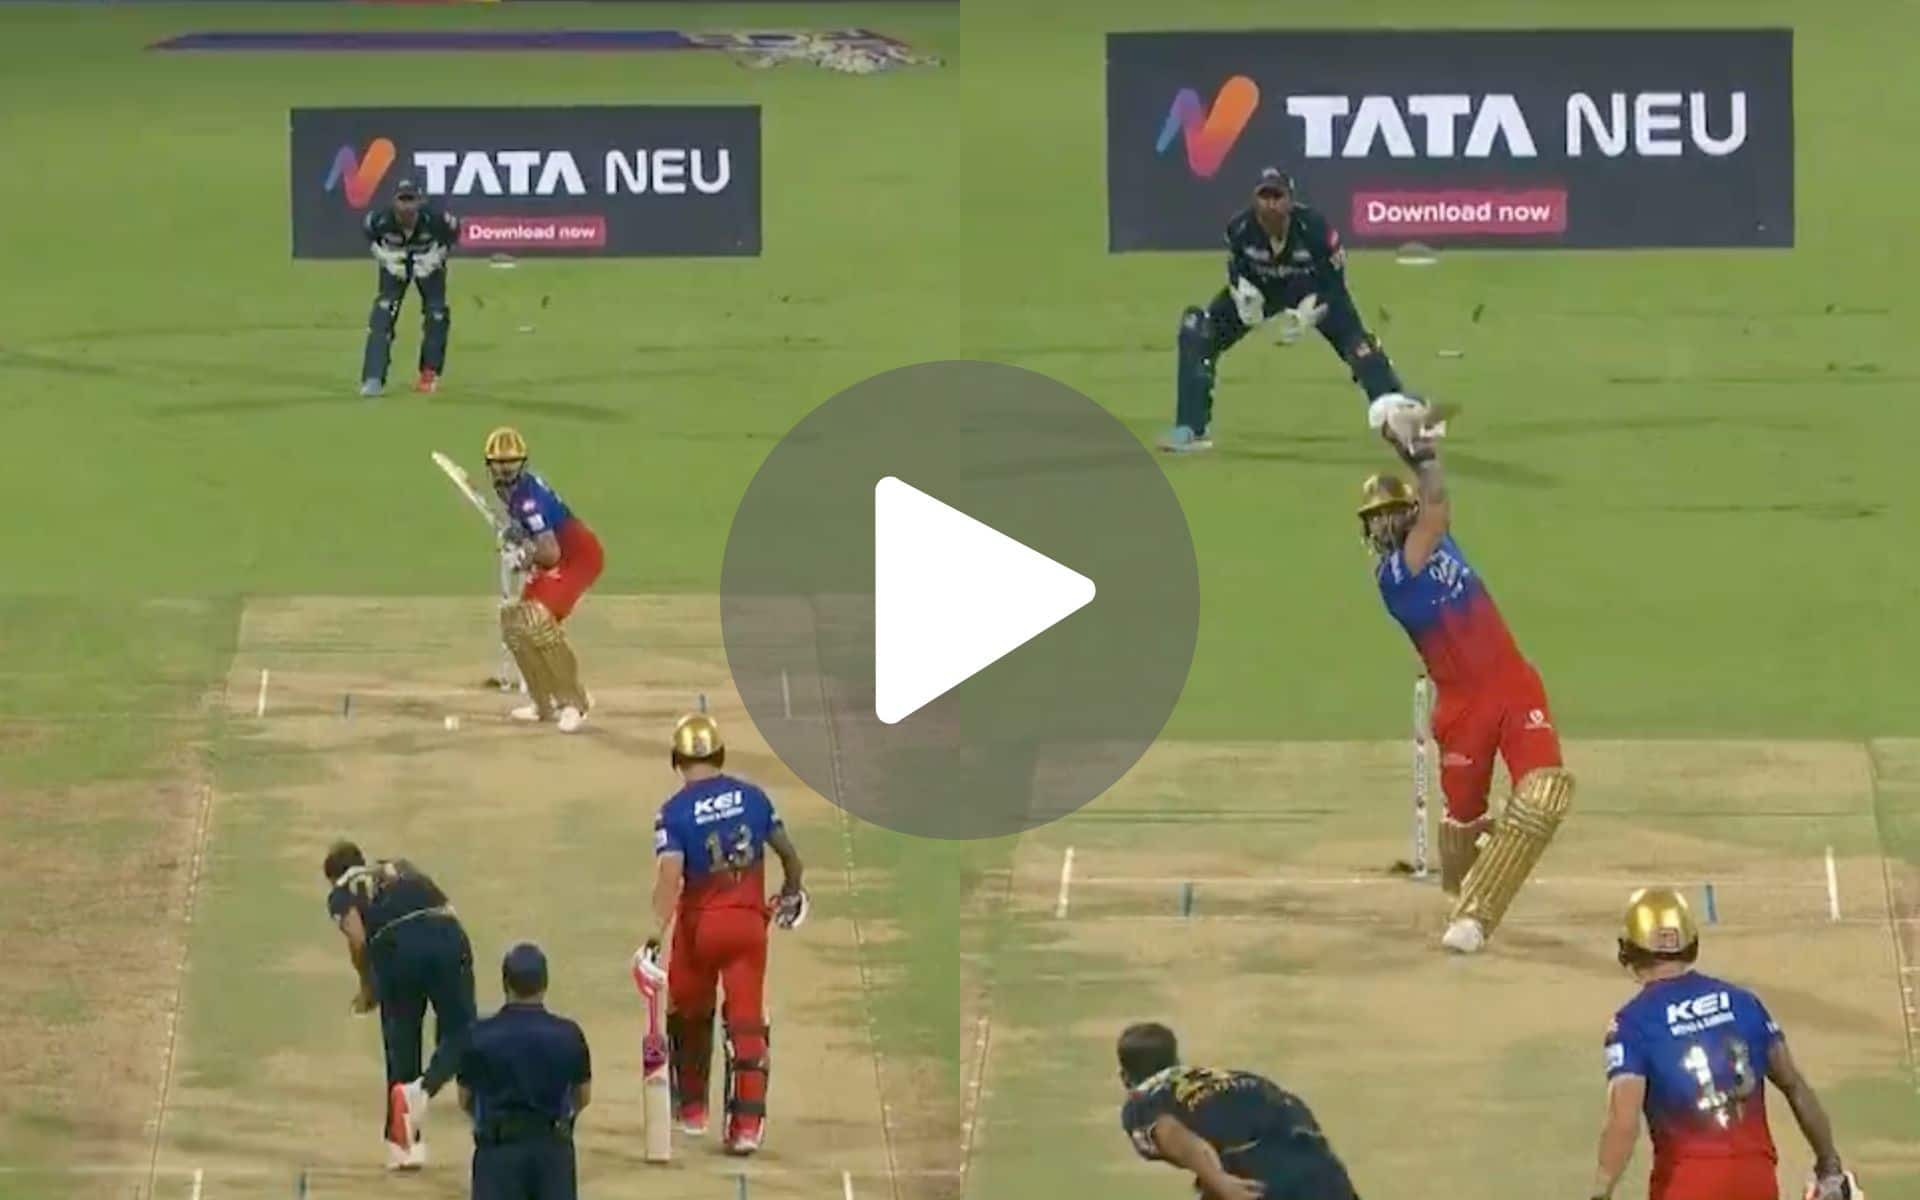 [Watch] Virat Kohli 'Holds The Pose Like The King' While Playing A Spectacular Six Off Mohit